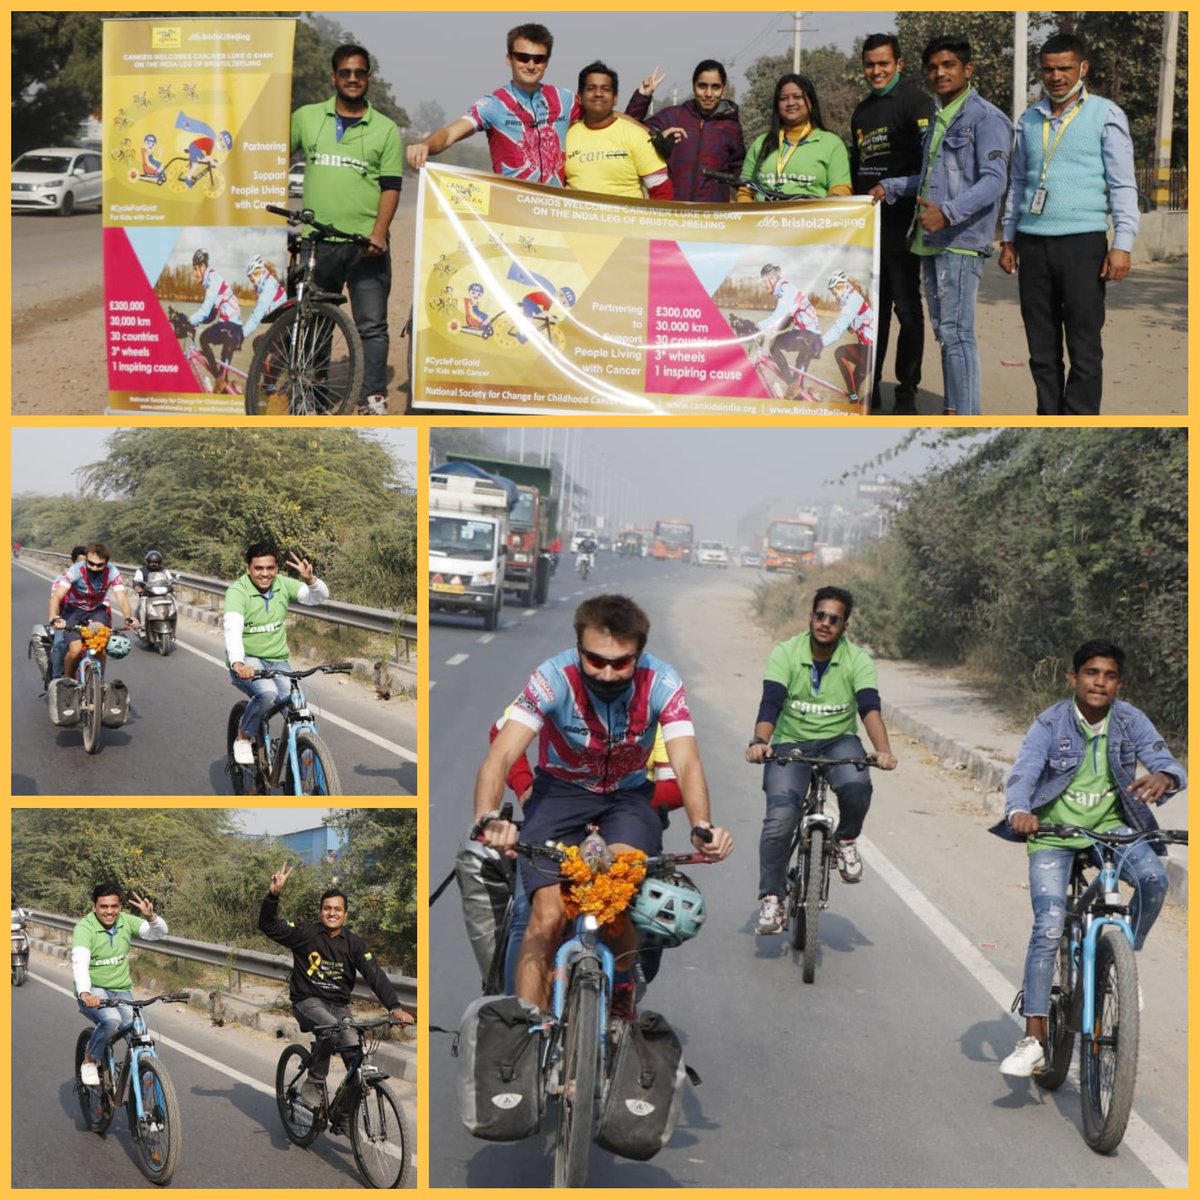 Luke @Bristol2B and Dev Mukherjee riding tandem receive a rousing welcome at the Singhu border of Delhi from members of @cankidz KCK group. #bristoltobeijing #cankids #cycleforgold #cyclothon #delhi #canliver #CancerAwareness #cancerwarrior #Cyclist